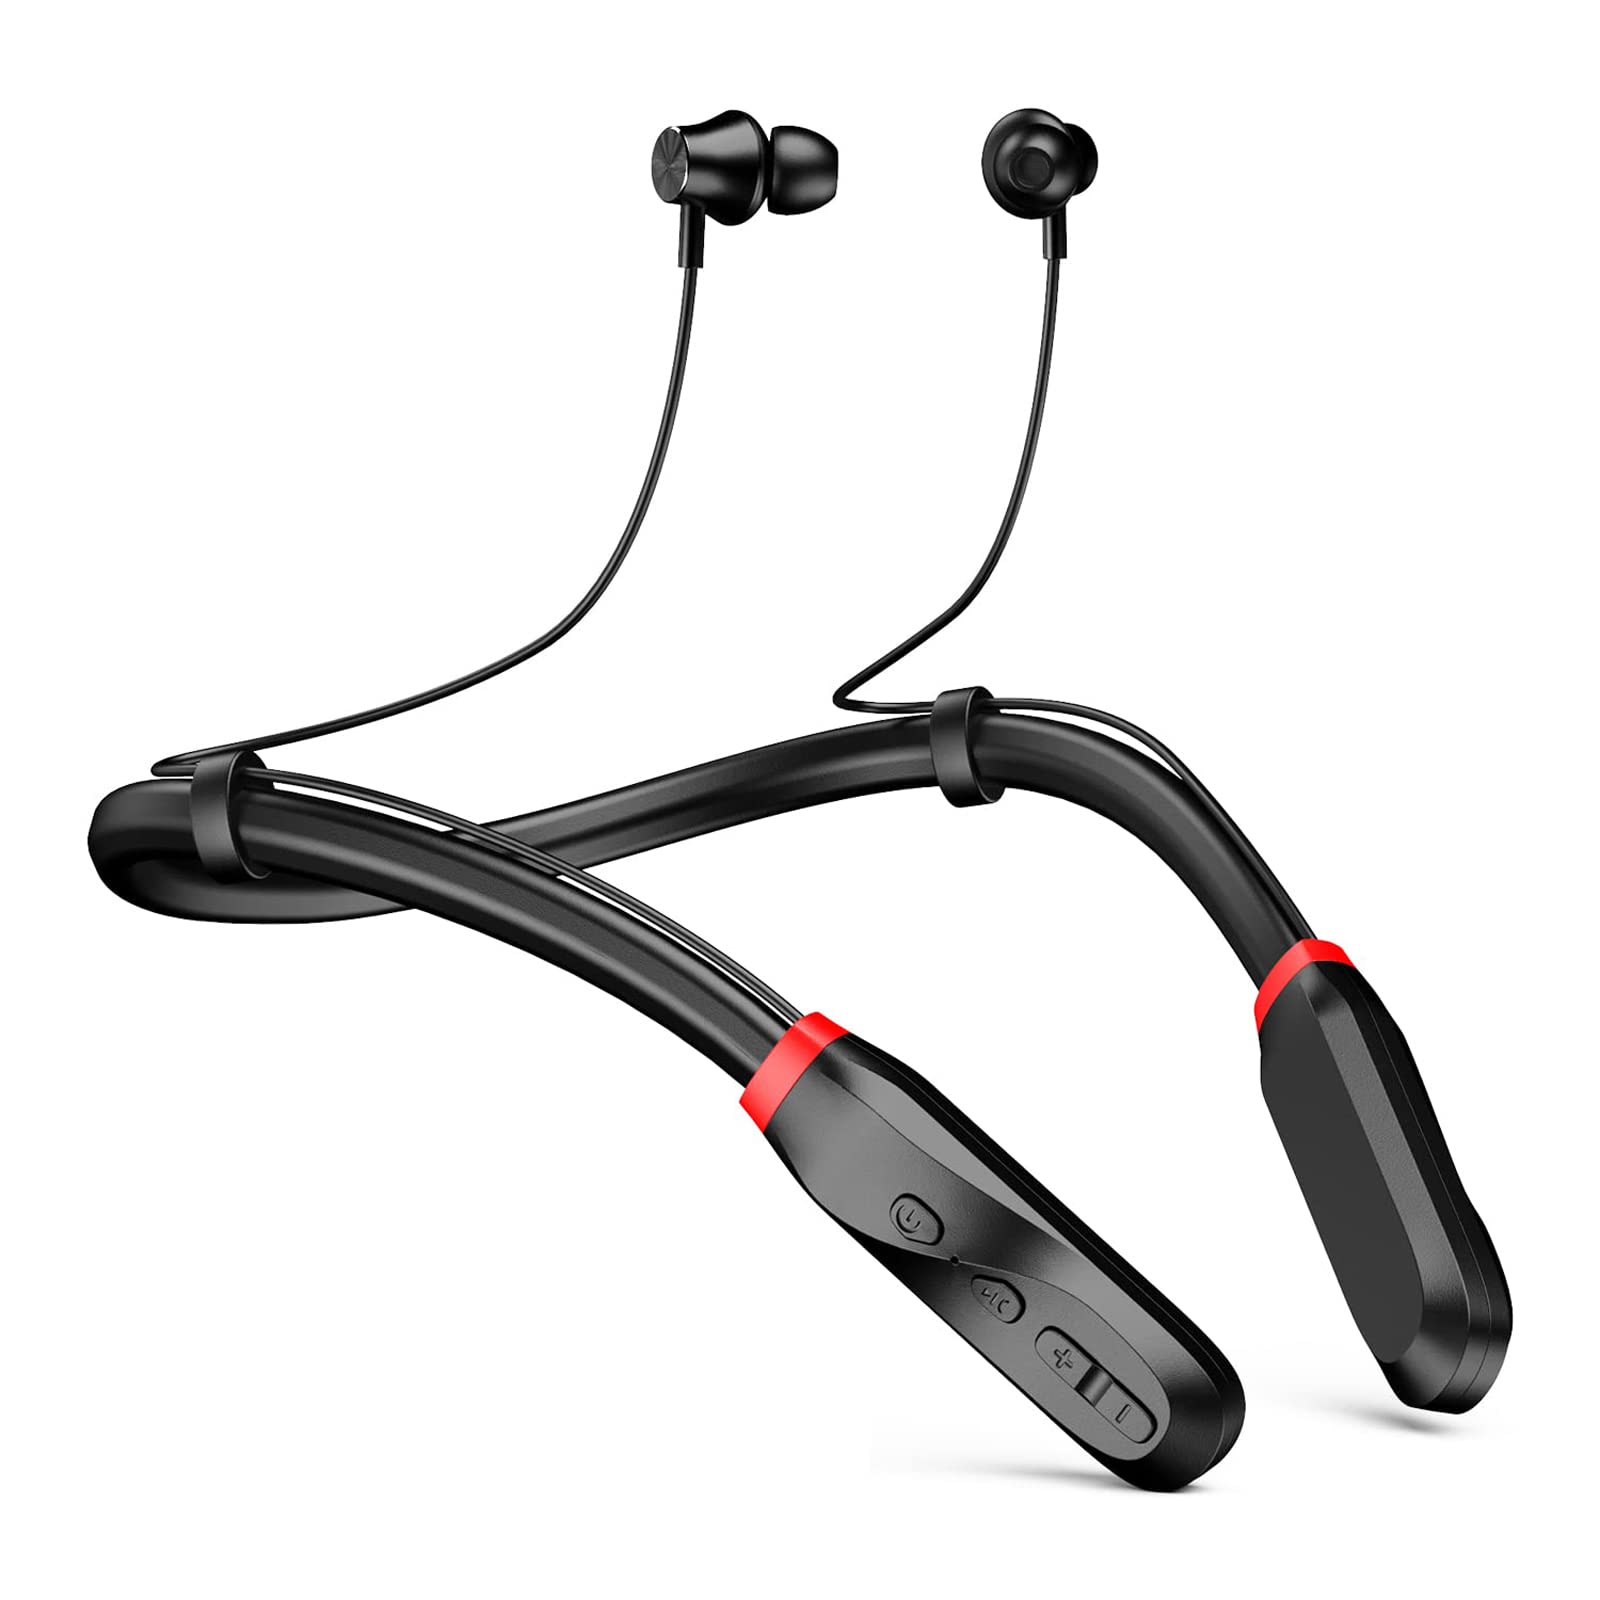 Wireless Bluetooth Earphones Neckband Headphones: 100H Ultra-Long Playing Time Bluetooth V5.1 Earbuds with Superior Stereo Sound & Clear Calls Microphone for Work Study Sport Travel | IPX5 Waterproof